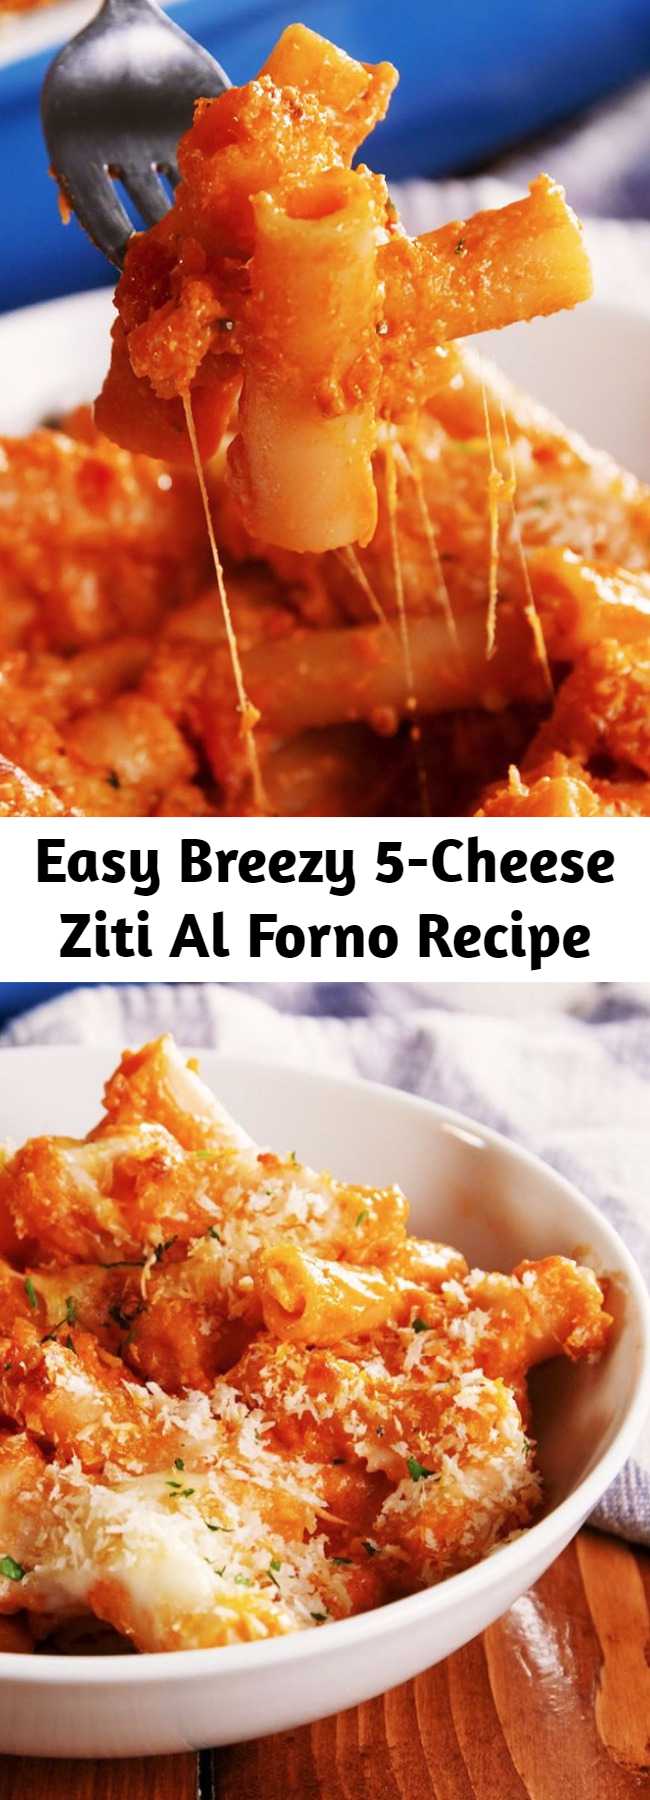 Easy Breezy 5-Cheese Ziti Al Forno Recipe - In case you missed it, copycat recipes are kind of our speciality. And this one tastes just like Olive Garden's 5-Cheese Ziti Al Forno…maybe better! Our advice: Buy a jar of marinara but make your own alfredo! #easy #recipe #pasta #cheese #fivecheese #olivegarden #copycat #ziti #baked #dinner #italian #comfortfood #redsauce #pastasauce